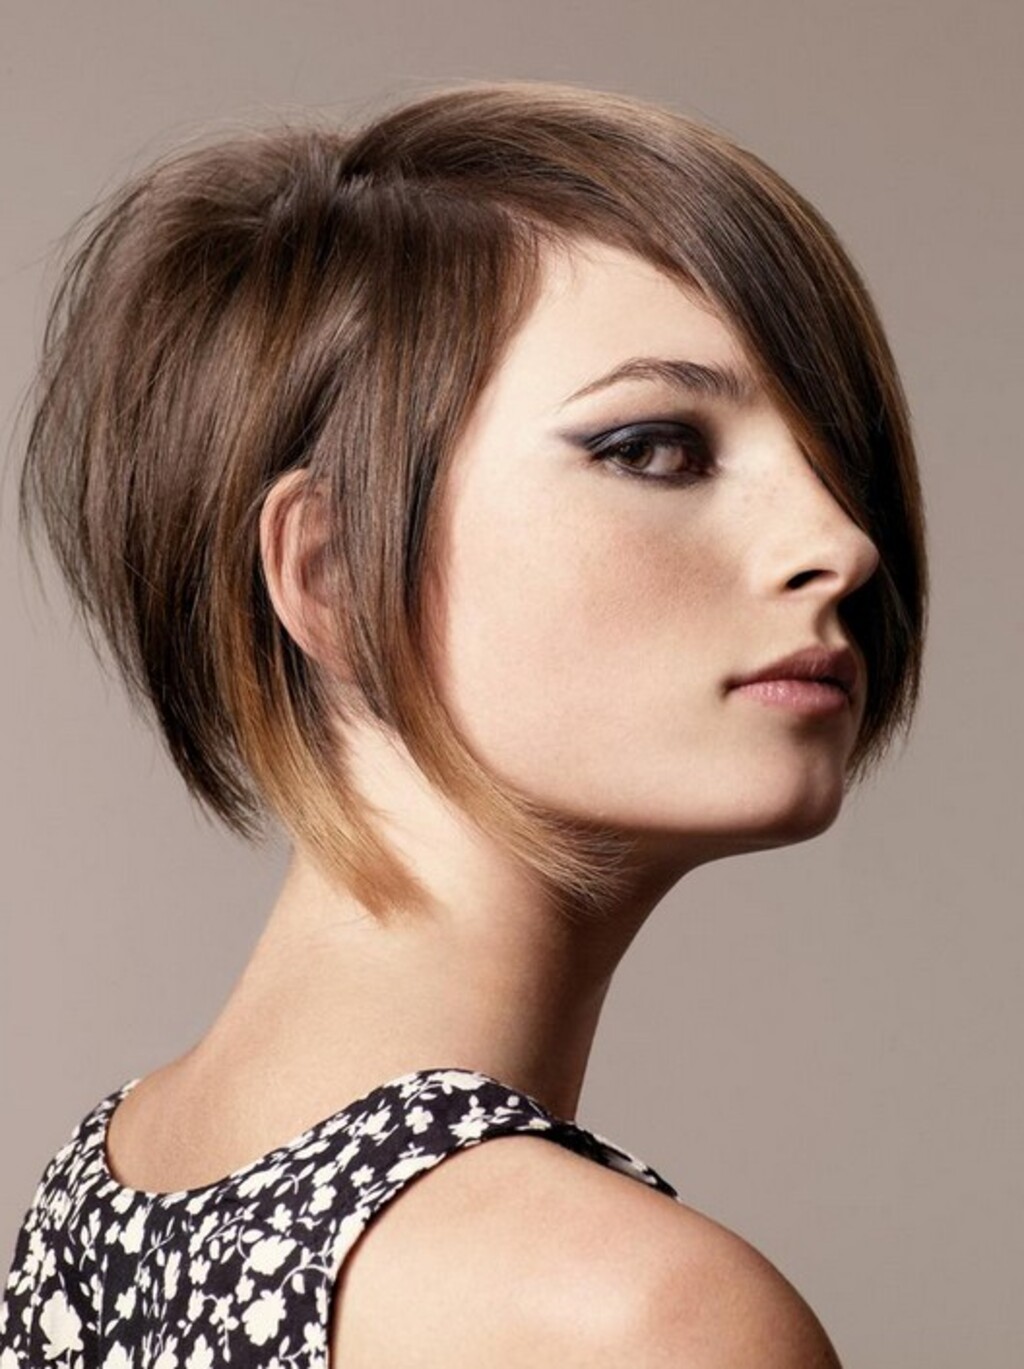 A woman with funky short stacked bob hair style and wear black and with floral dress